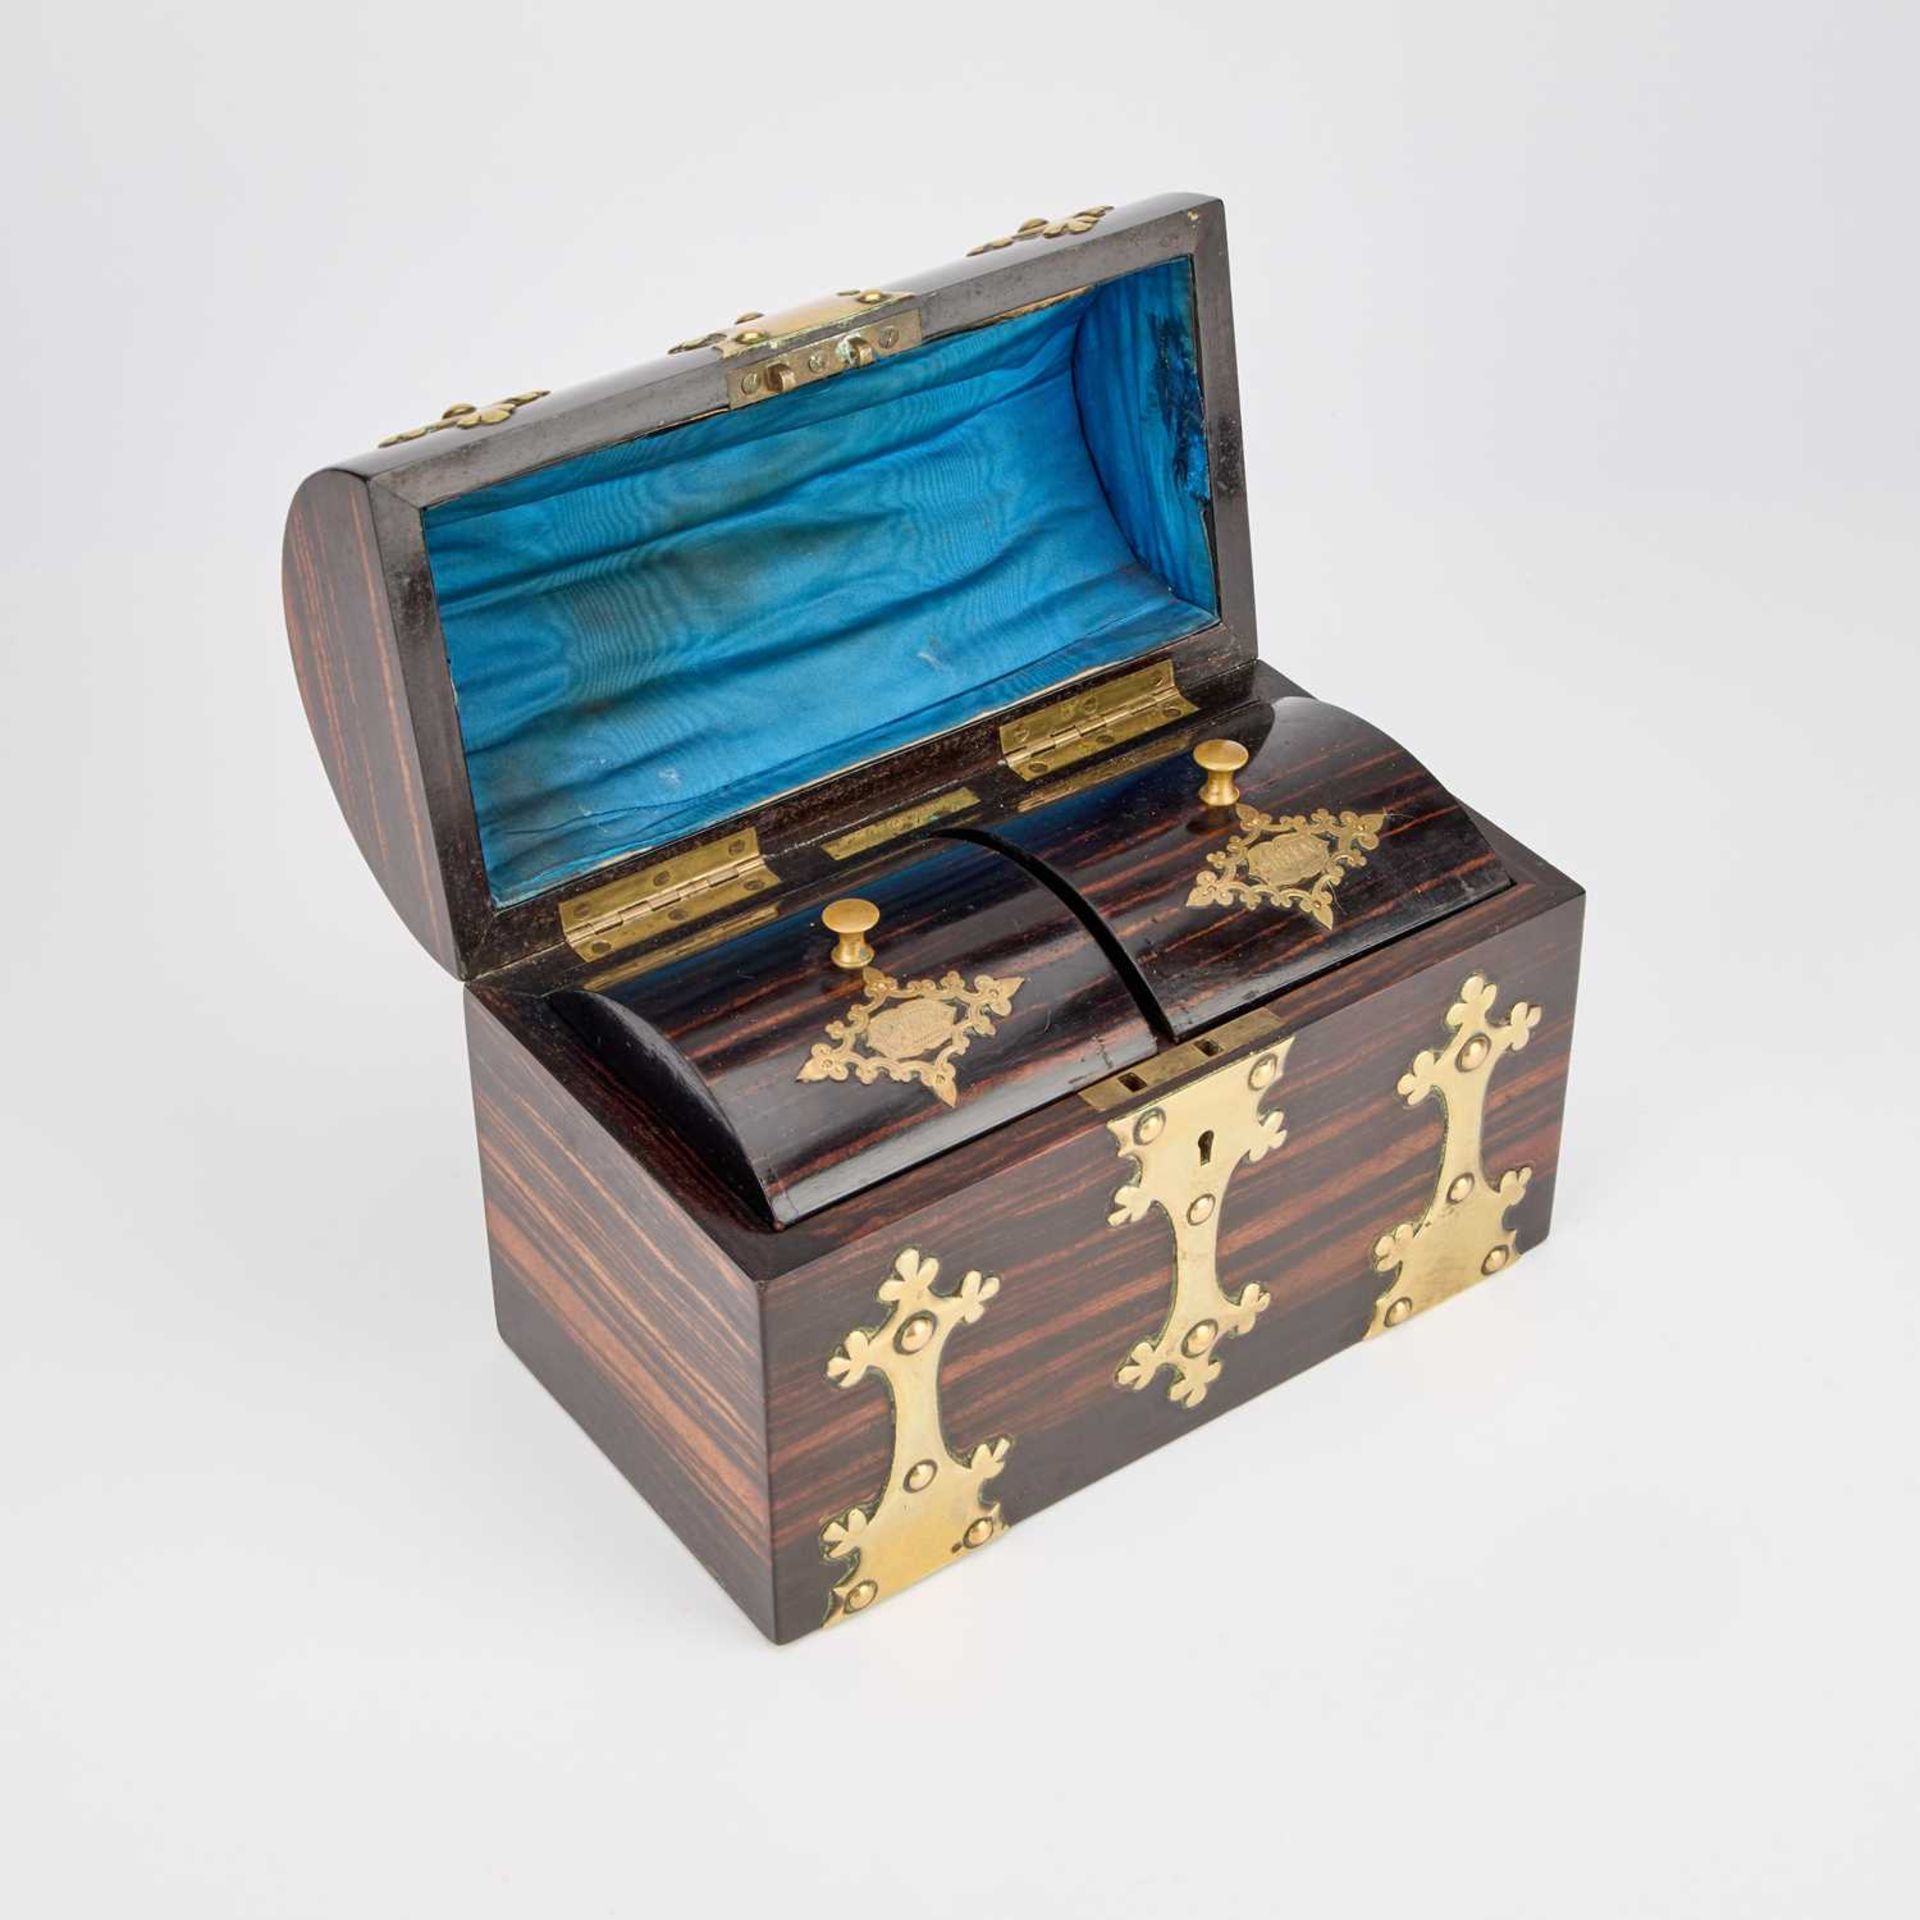 A VICTORIAN BRASS-MOUNTED COROMANDEL TEA CADDY, SIGNED J & G HAYWOOD, DERBY - Image 2 of 6